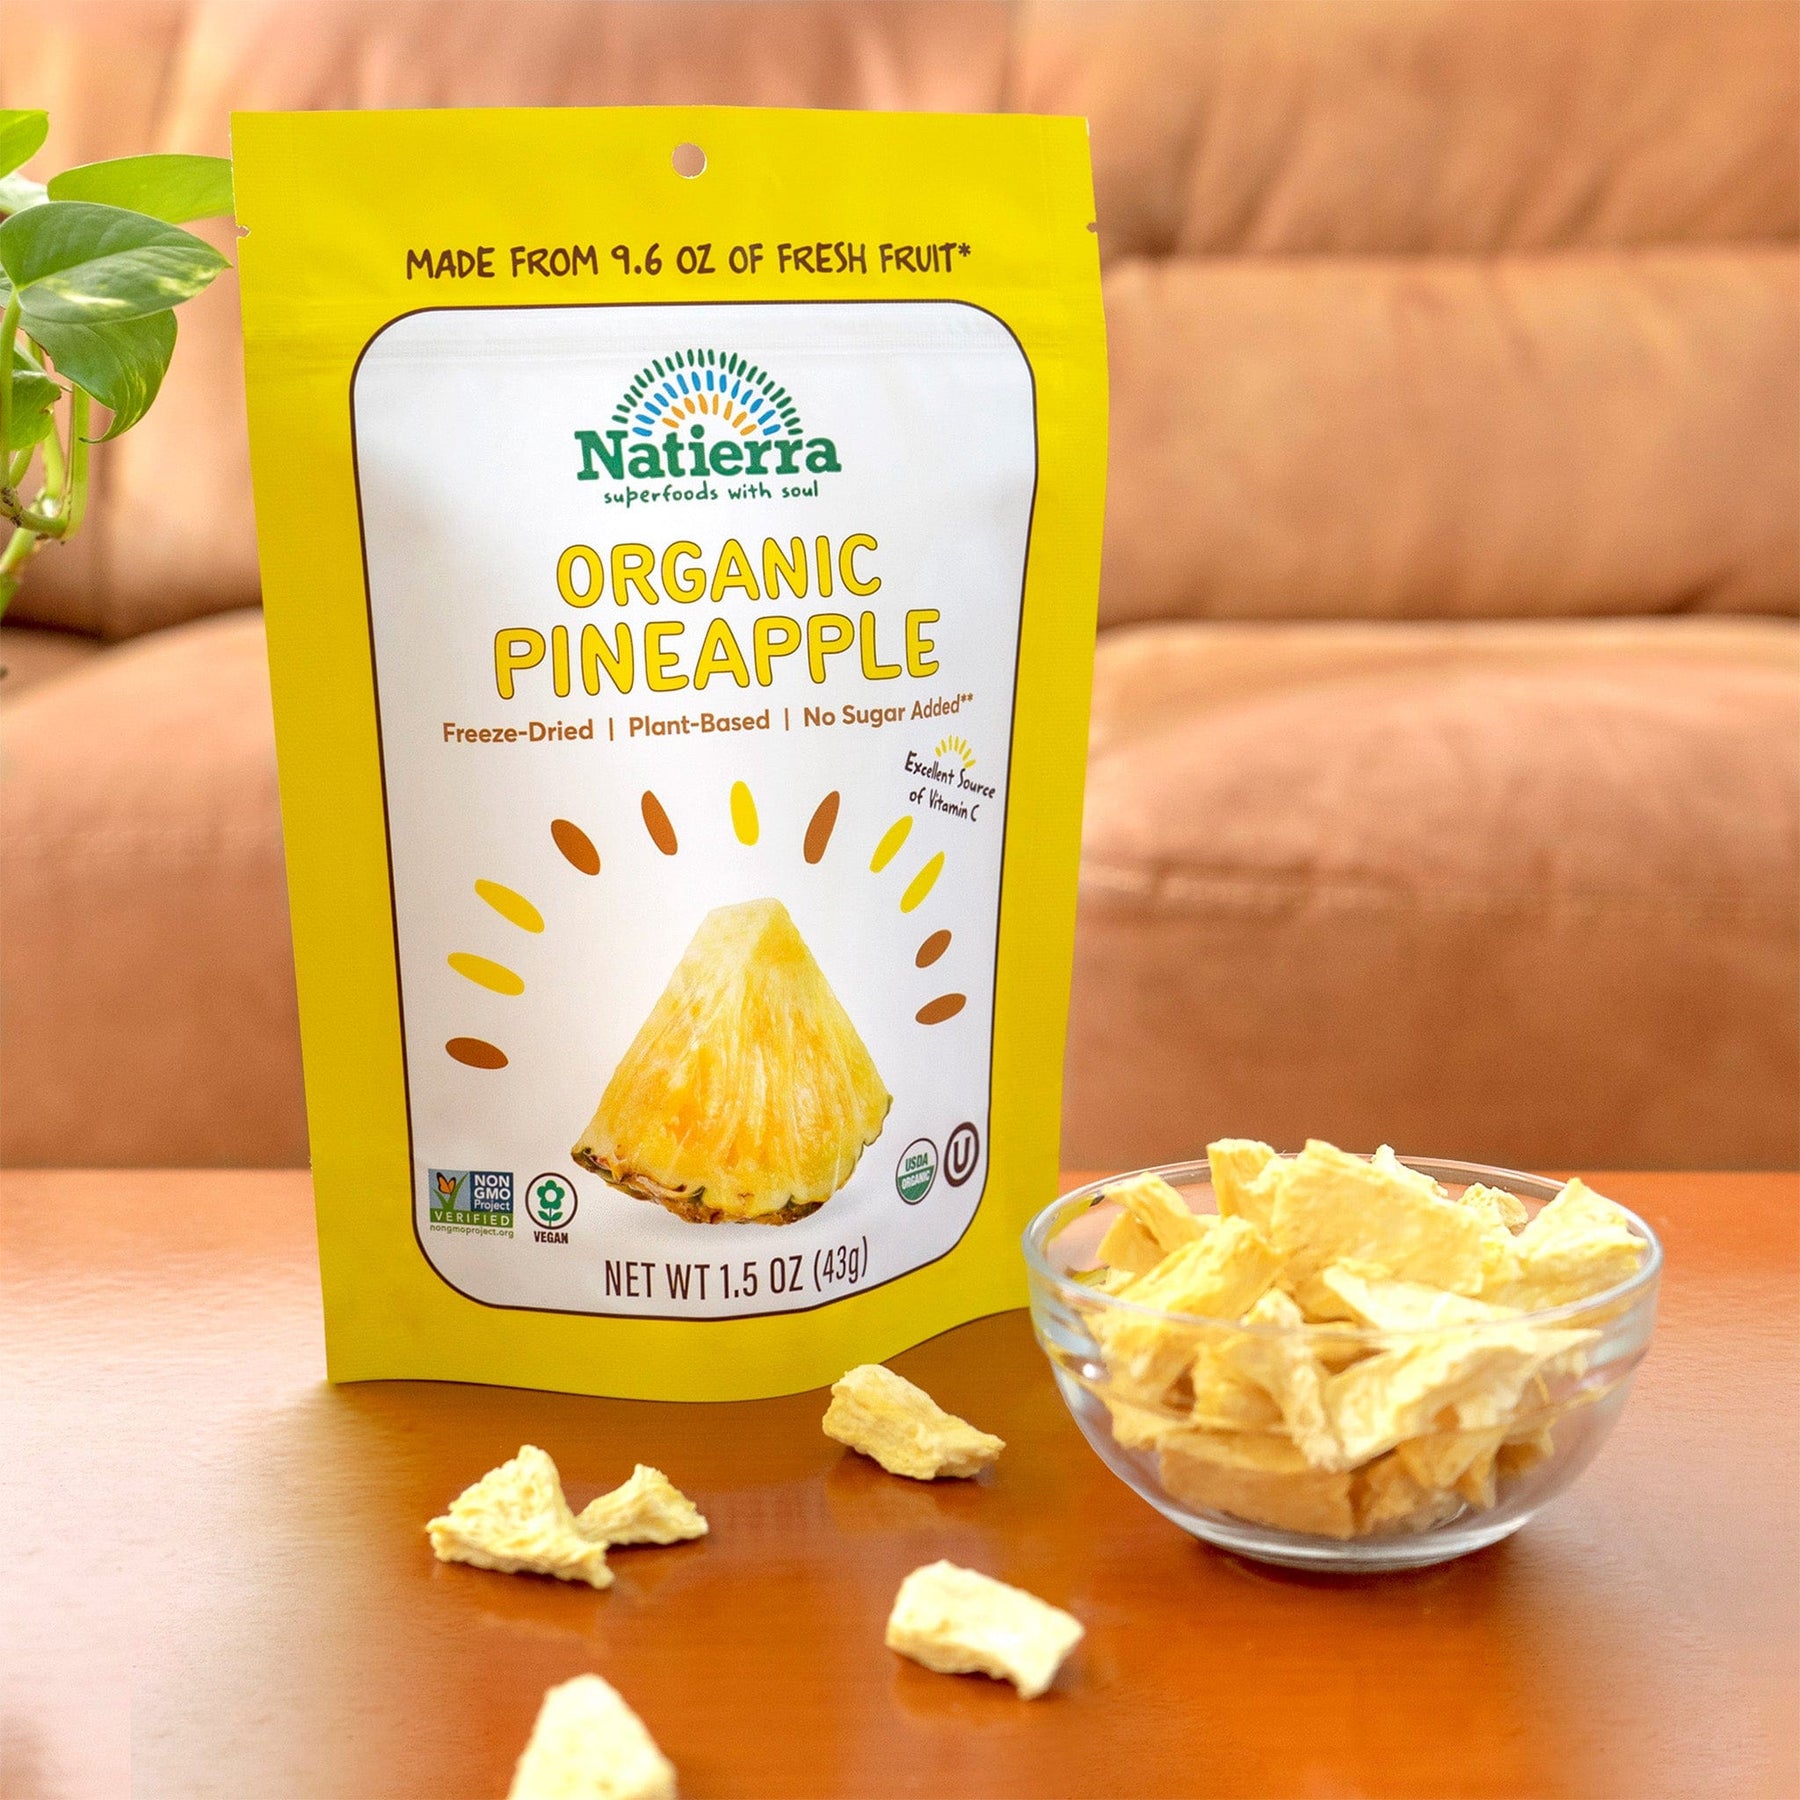 Natierra Organic Freeze-Dried Pineapple bag on a coffee table table 